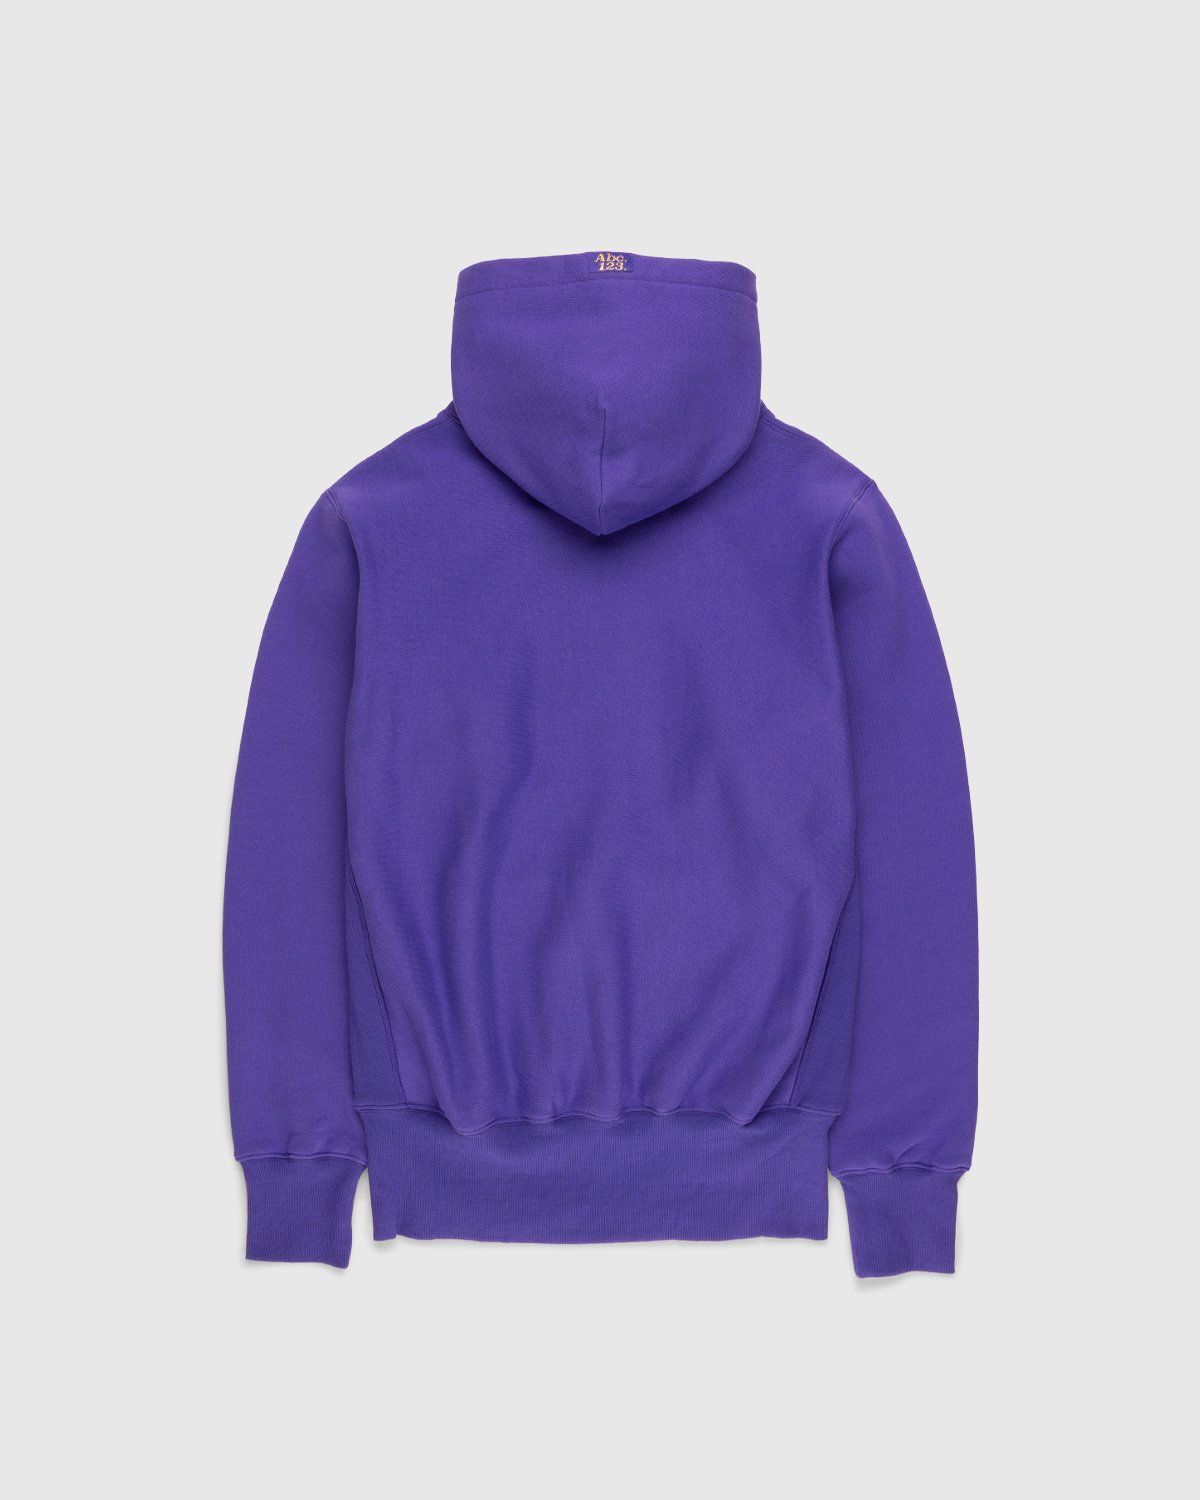 Abc. – Pullover Hoodie Sapphire - Sweats - Blue - Image 2